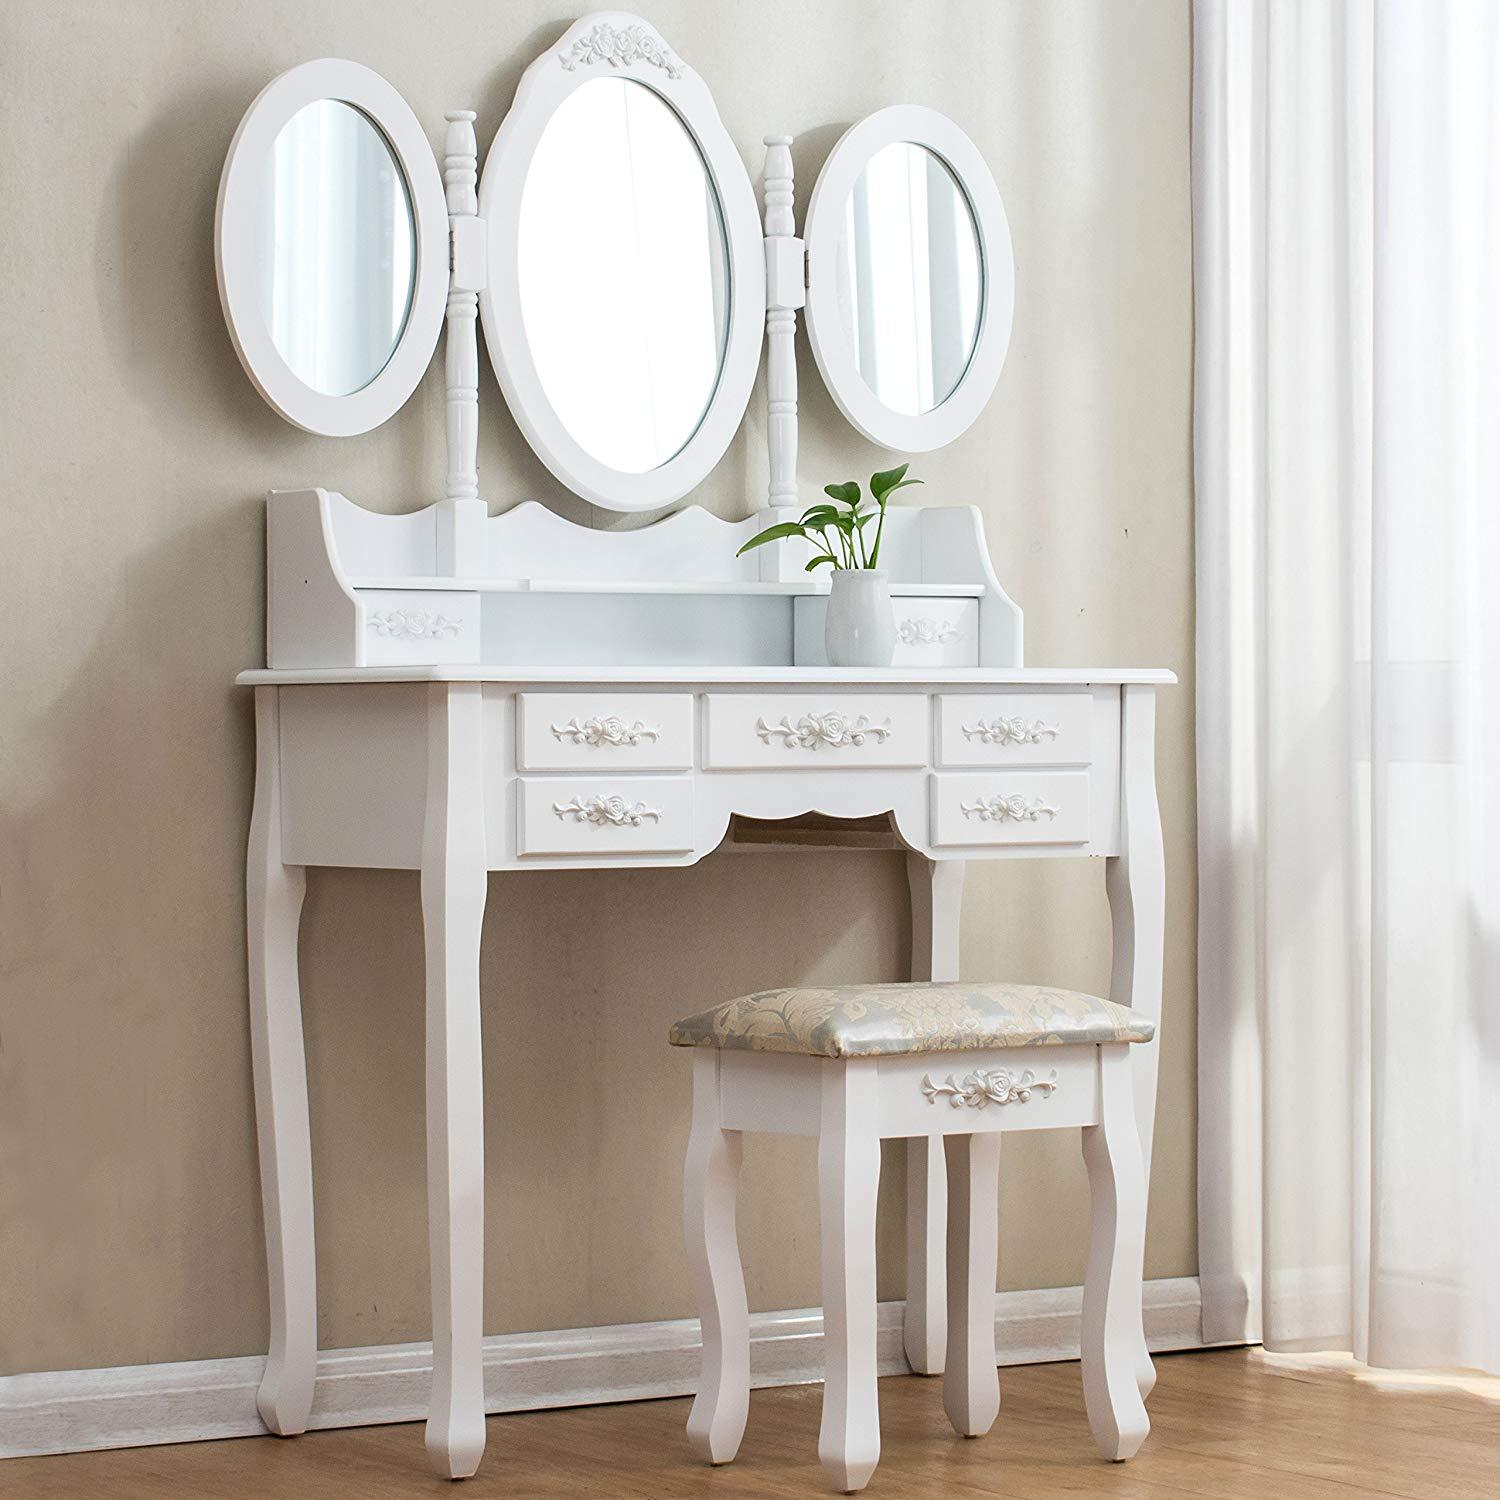 Large White 7 Drawer Vanity Makeup Dressing Table Set With 3 Mirrors And Jacquard Cushioned Stool Shop Designer Home Furnishings